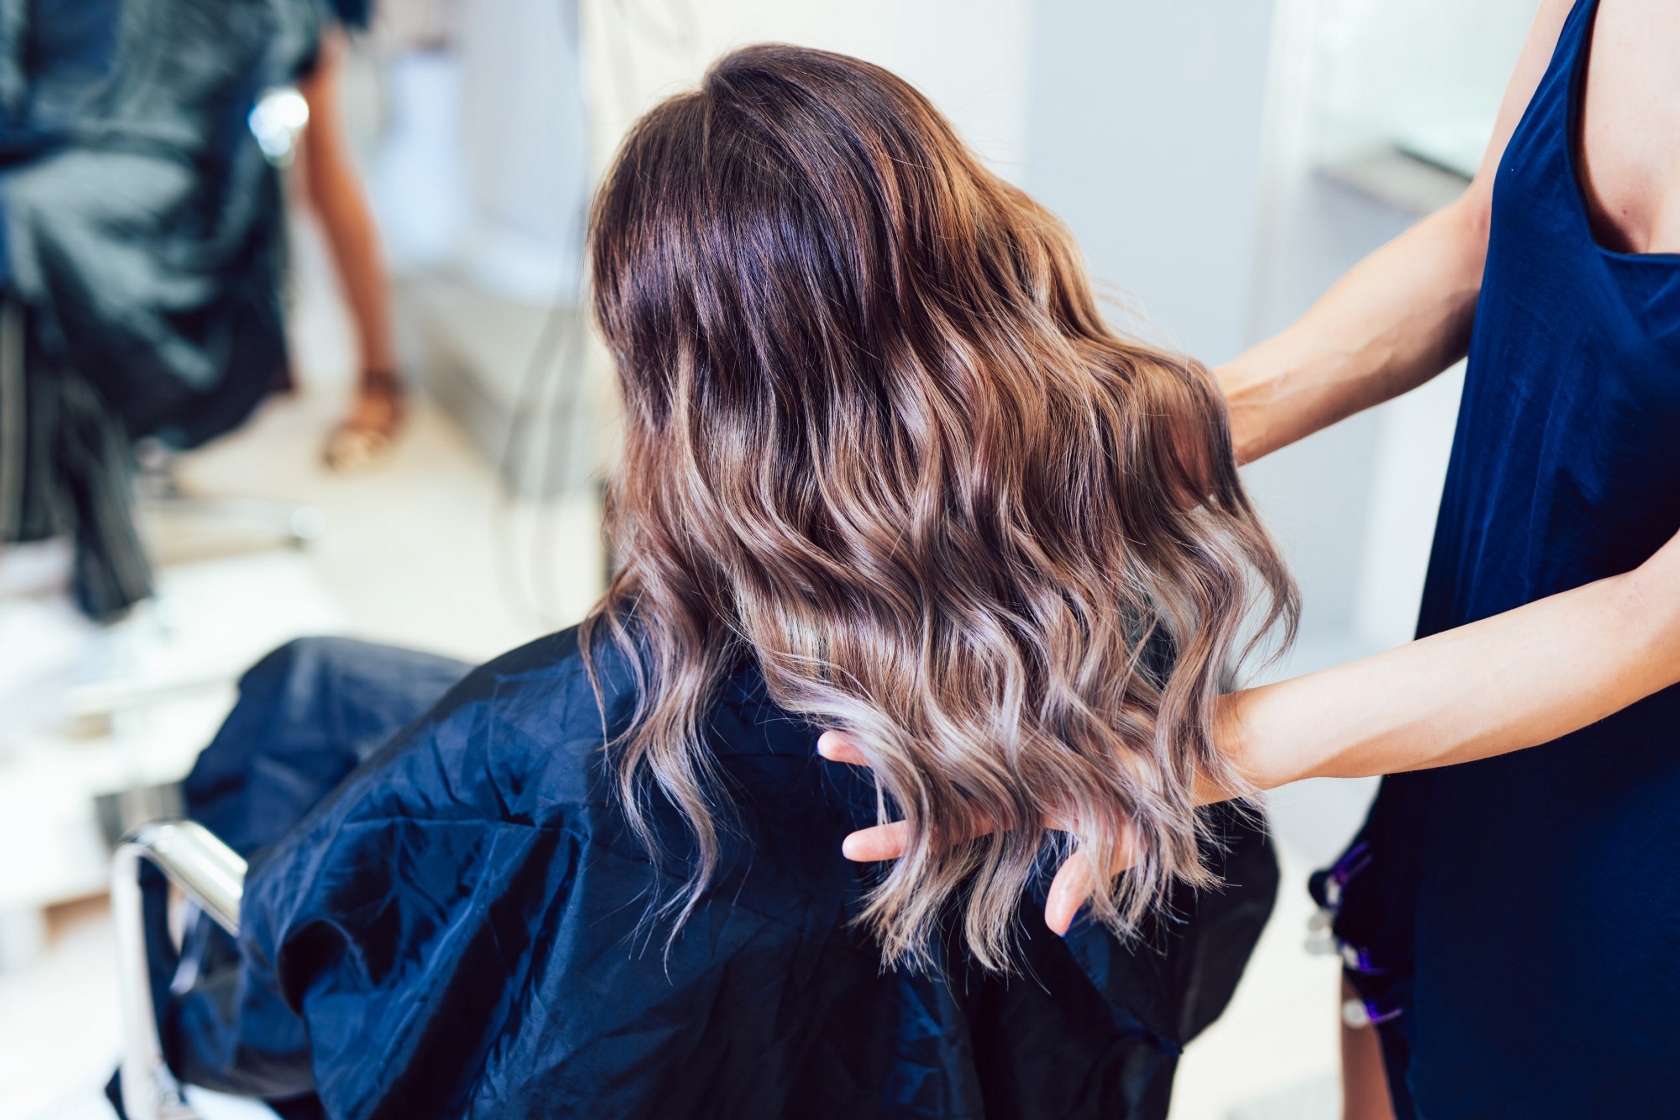 Light Up Your Colour with Highlights!